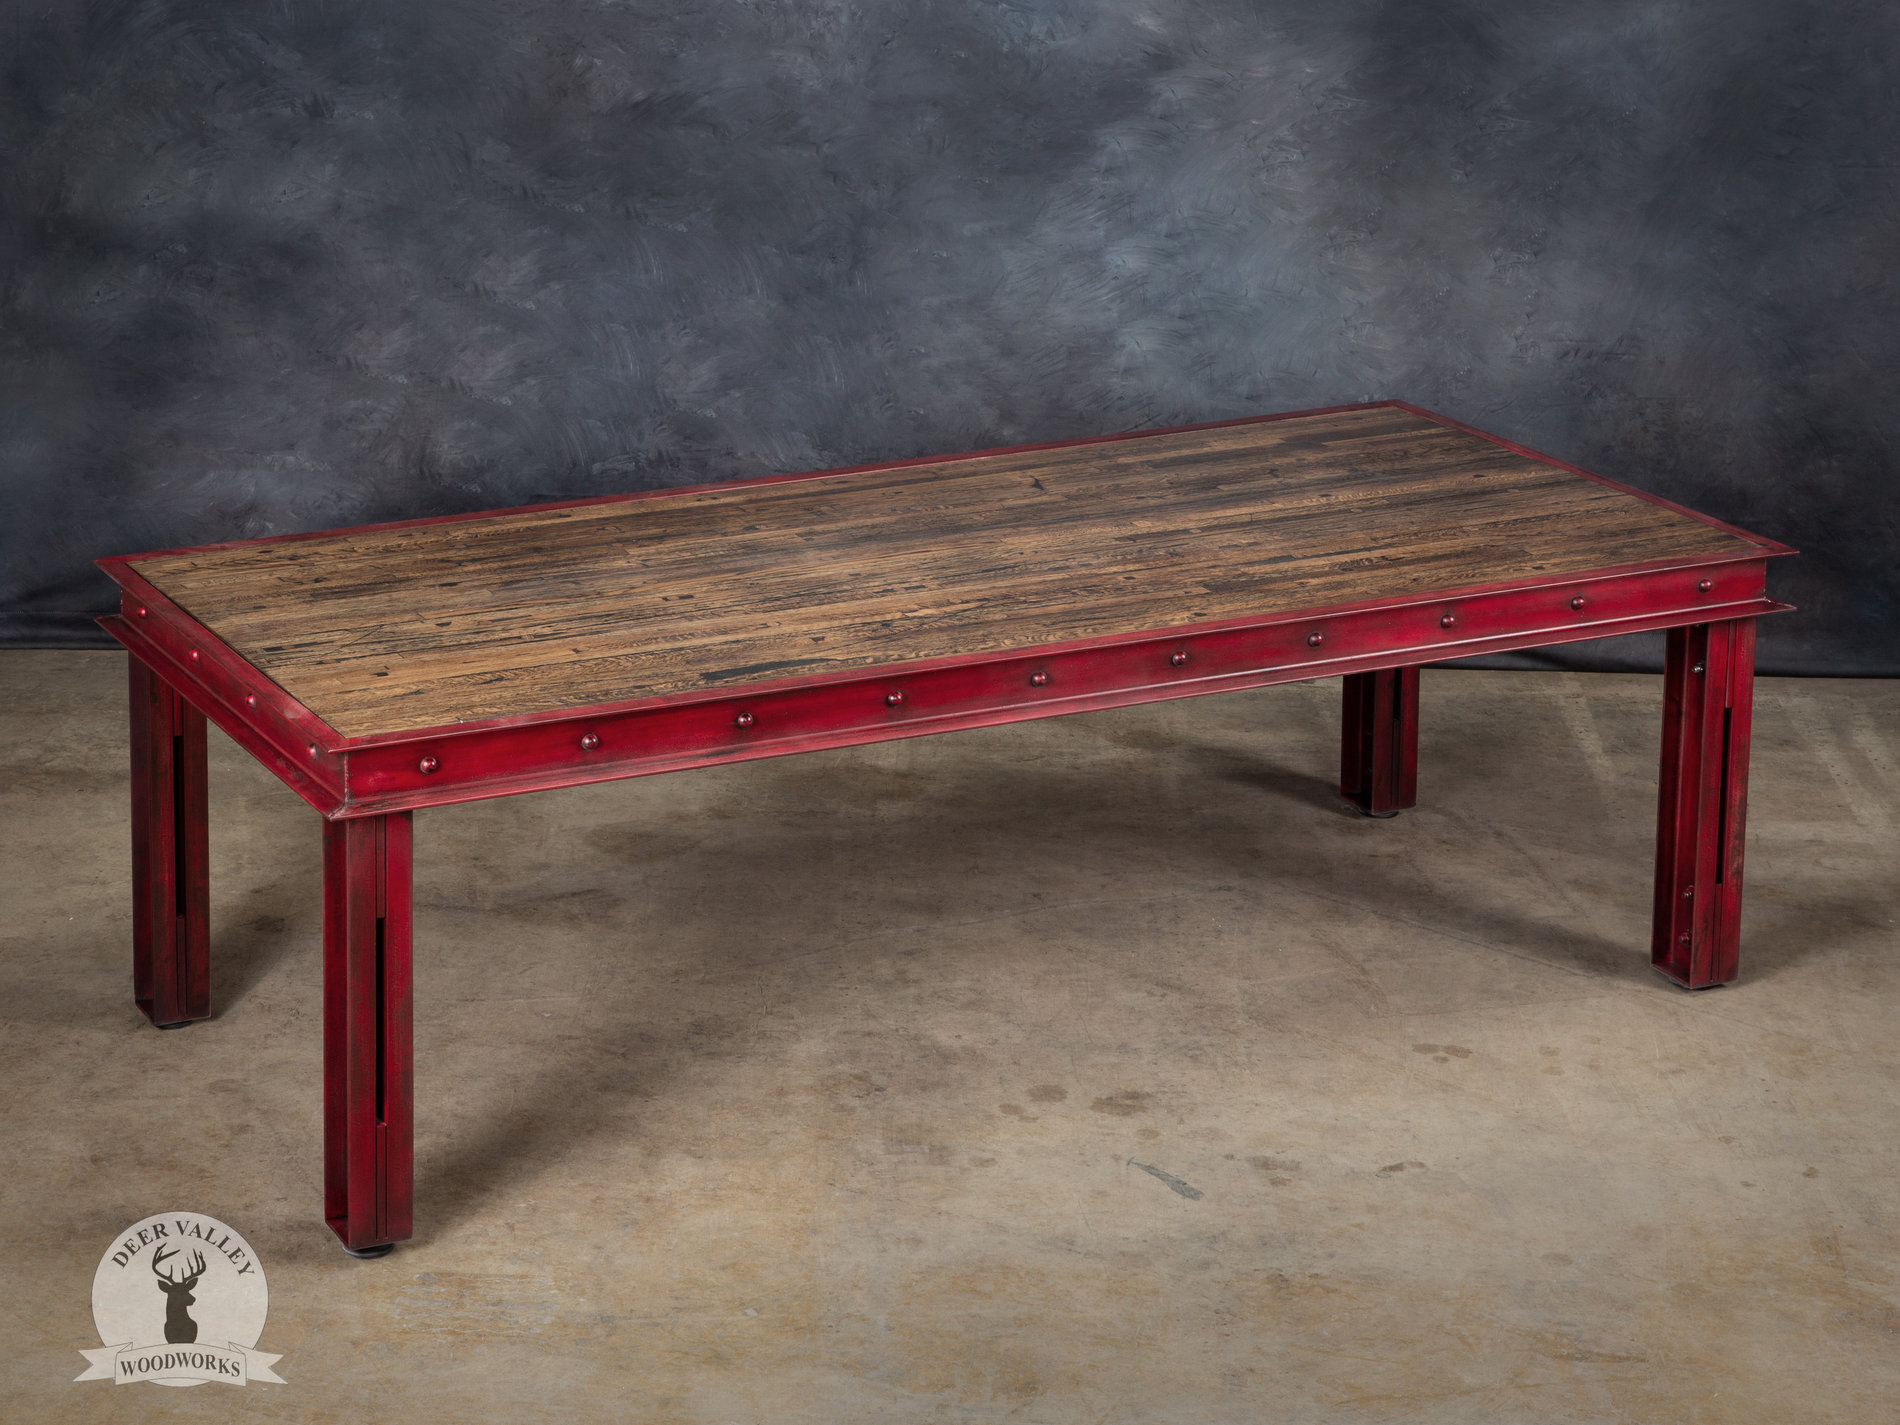 Industrial modern table with a huge, reclaimed wood top rapped in a red welded riveted frame supported by red structural steel channel legs.